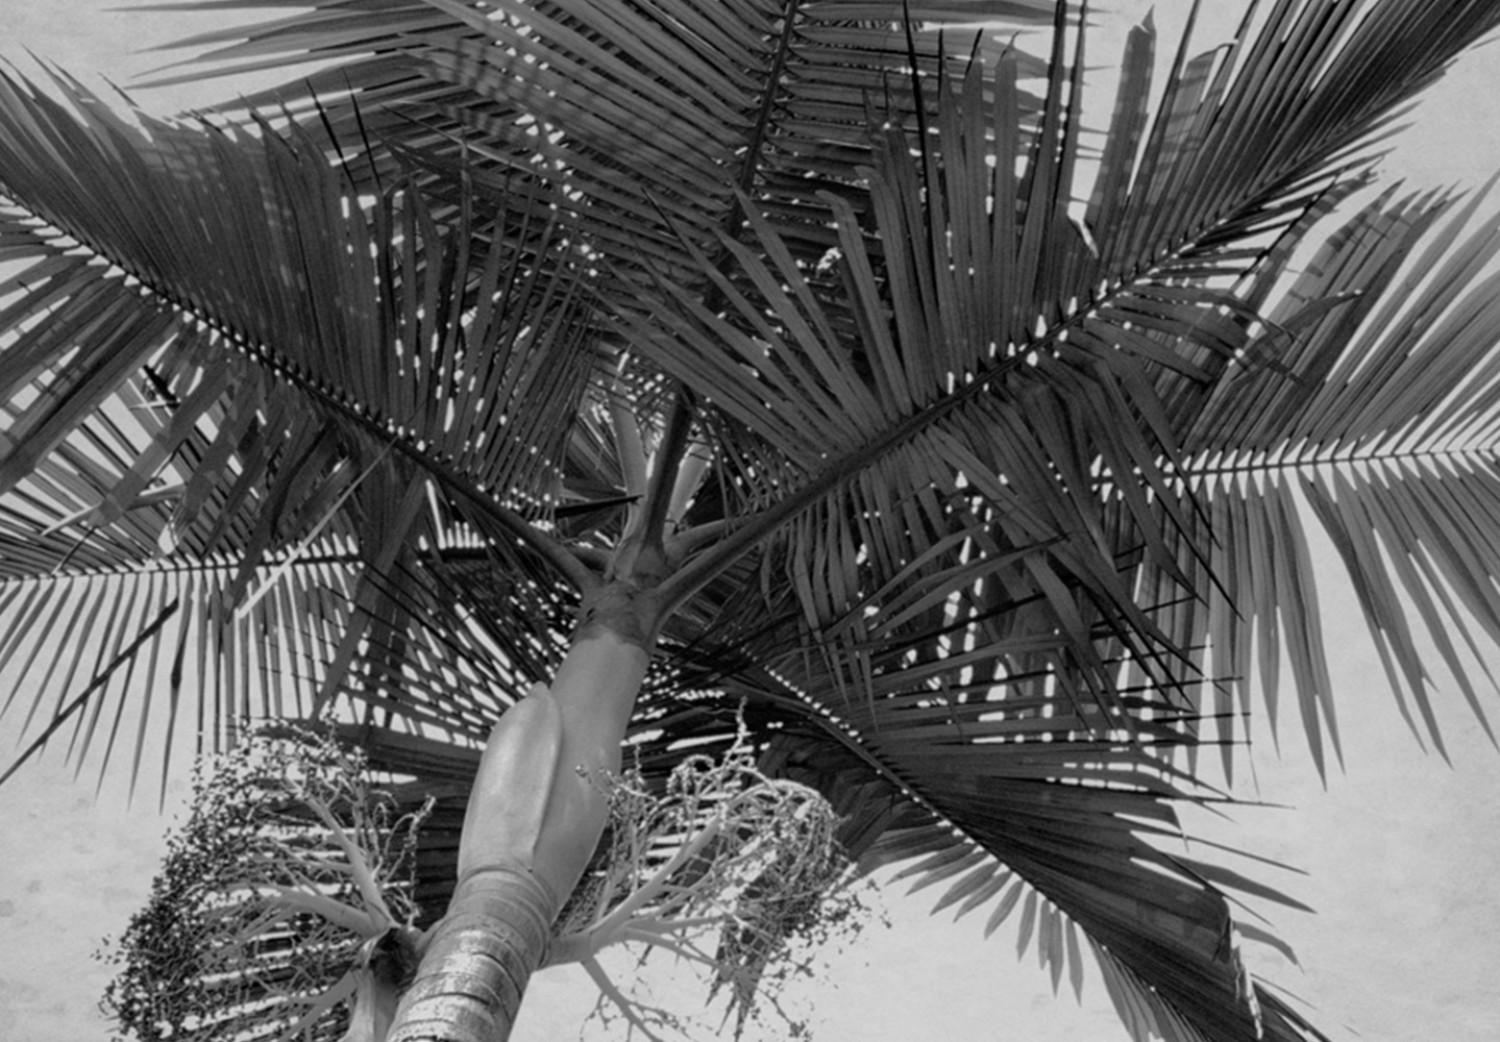 Canvas Holiday memories - palm trees and a car in a tropical climate